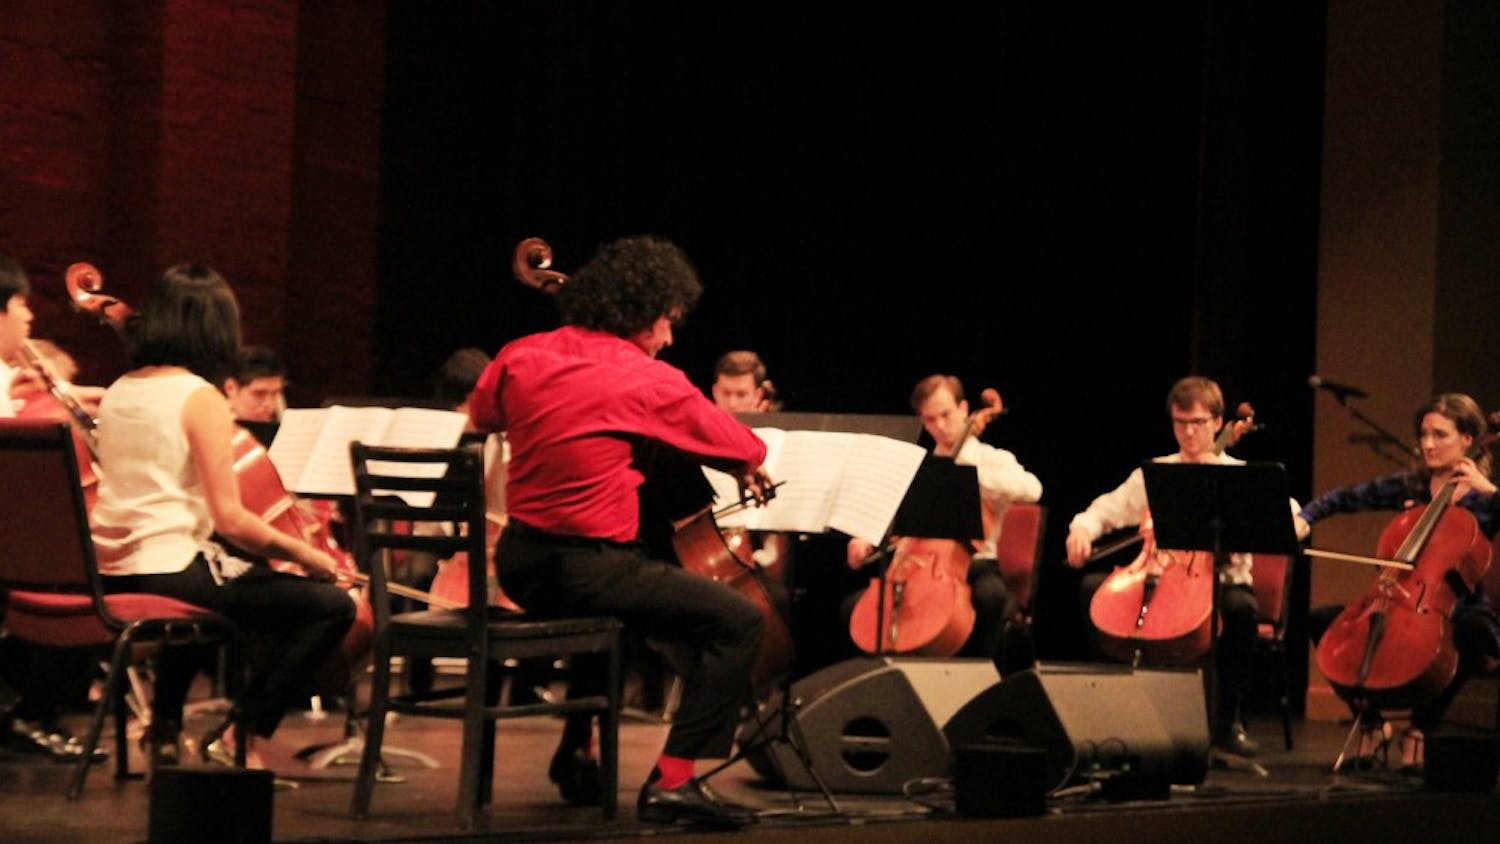 Cellists from the studio of Emilio Colón play "Suite del ángel" by Astor Piazzolla at the De Pueblo a Pueblo benefit concert Monday at the Buskirk-Chumley Theater. Colón also spoke about his travels to Puerto Rico to donate food and help families affected by Hurricane Maria.&nbsp;